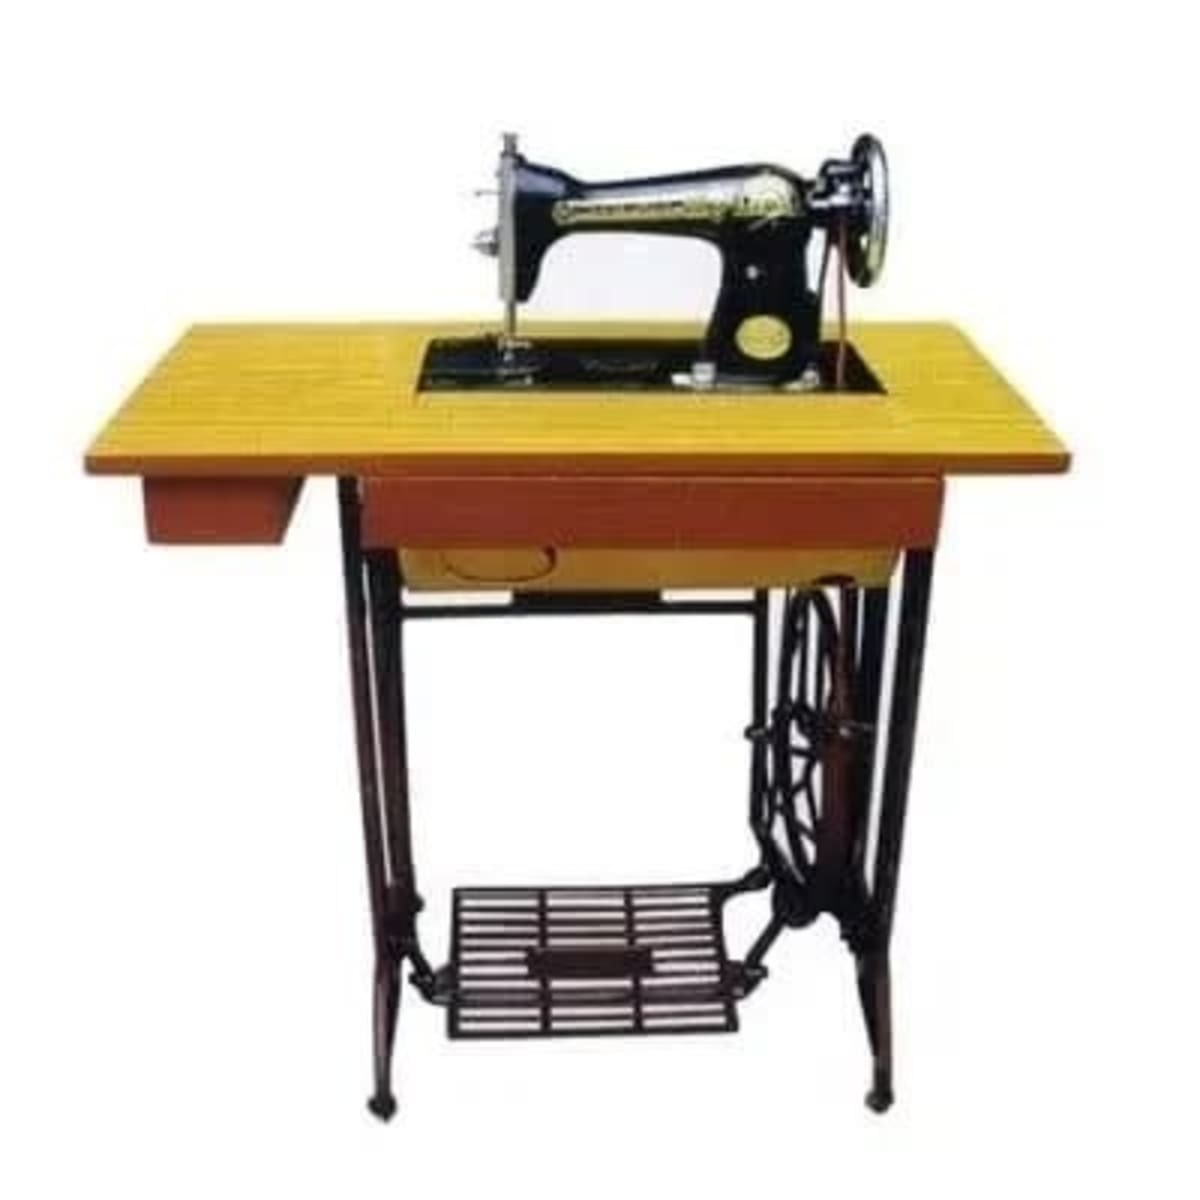 Butterfly Sewing Machine - Automatic And Manual